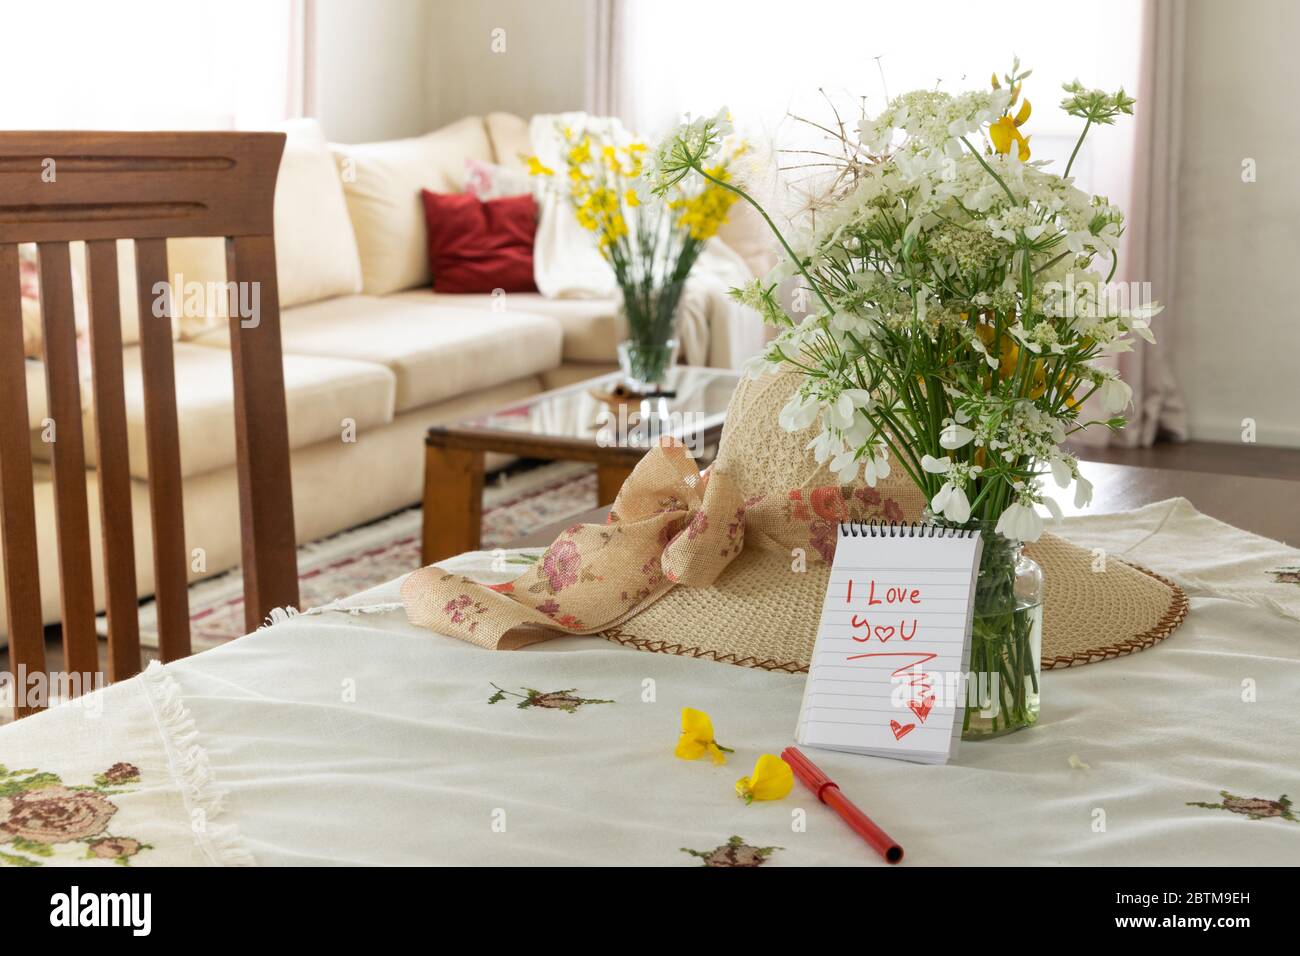 Cosy living interior with wild flowers bouquet and I love you note Stock Photo